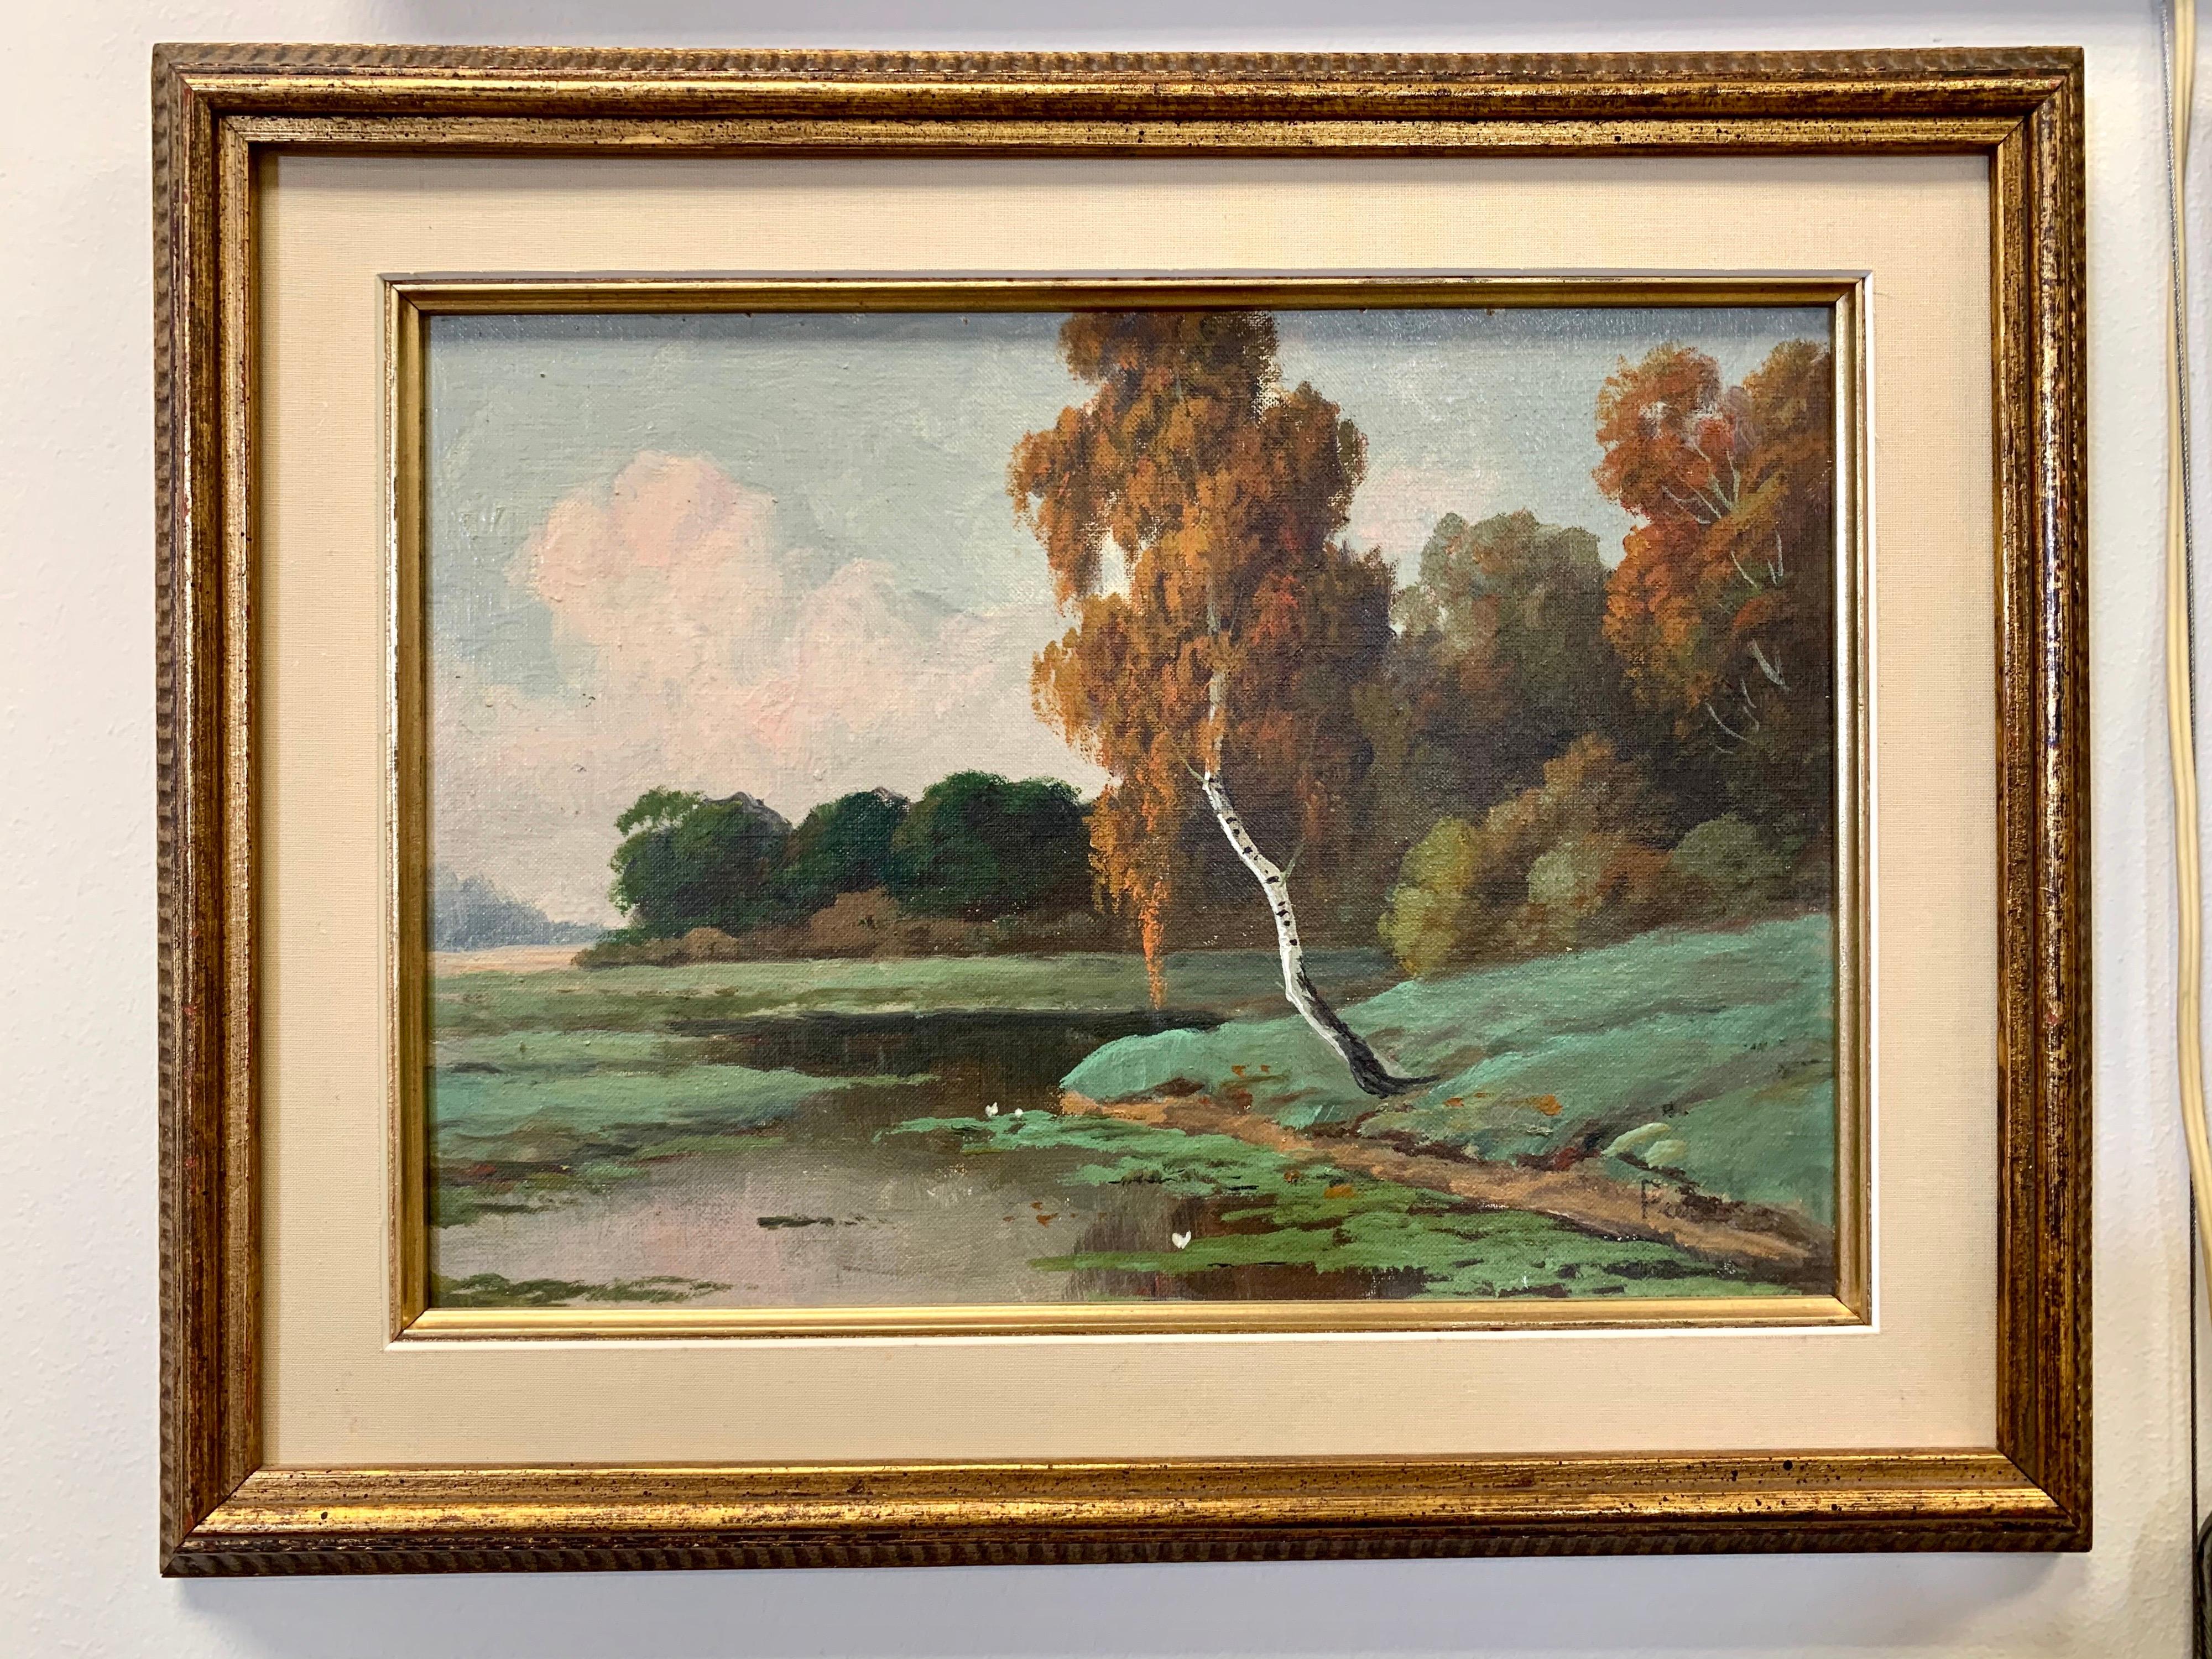 Two original oil paintings with matching frames depicting trees in a landscape. Signed “Pease”. Displayed and matted in a giltwood frame.